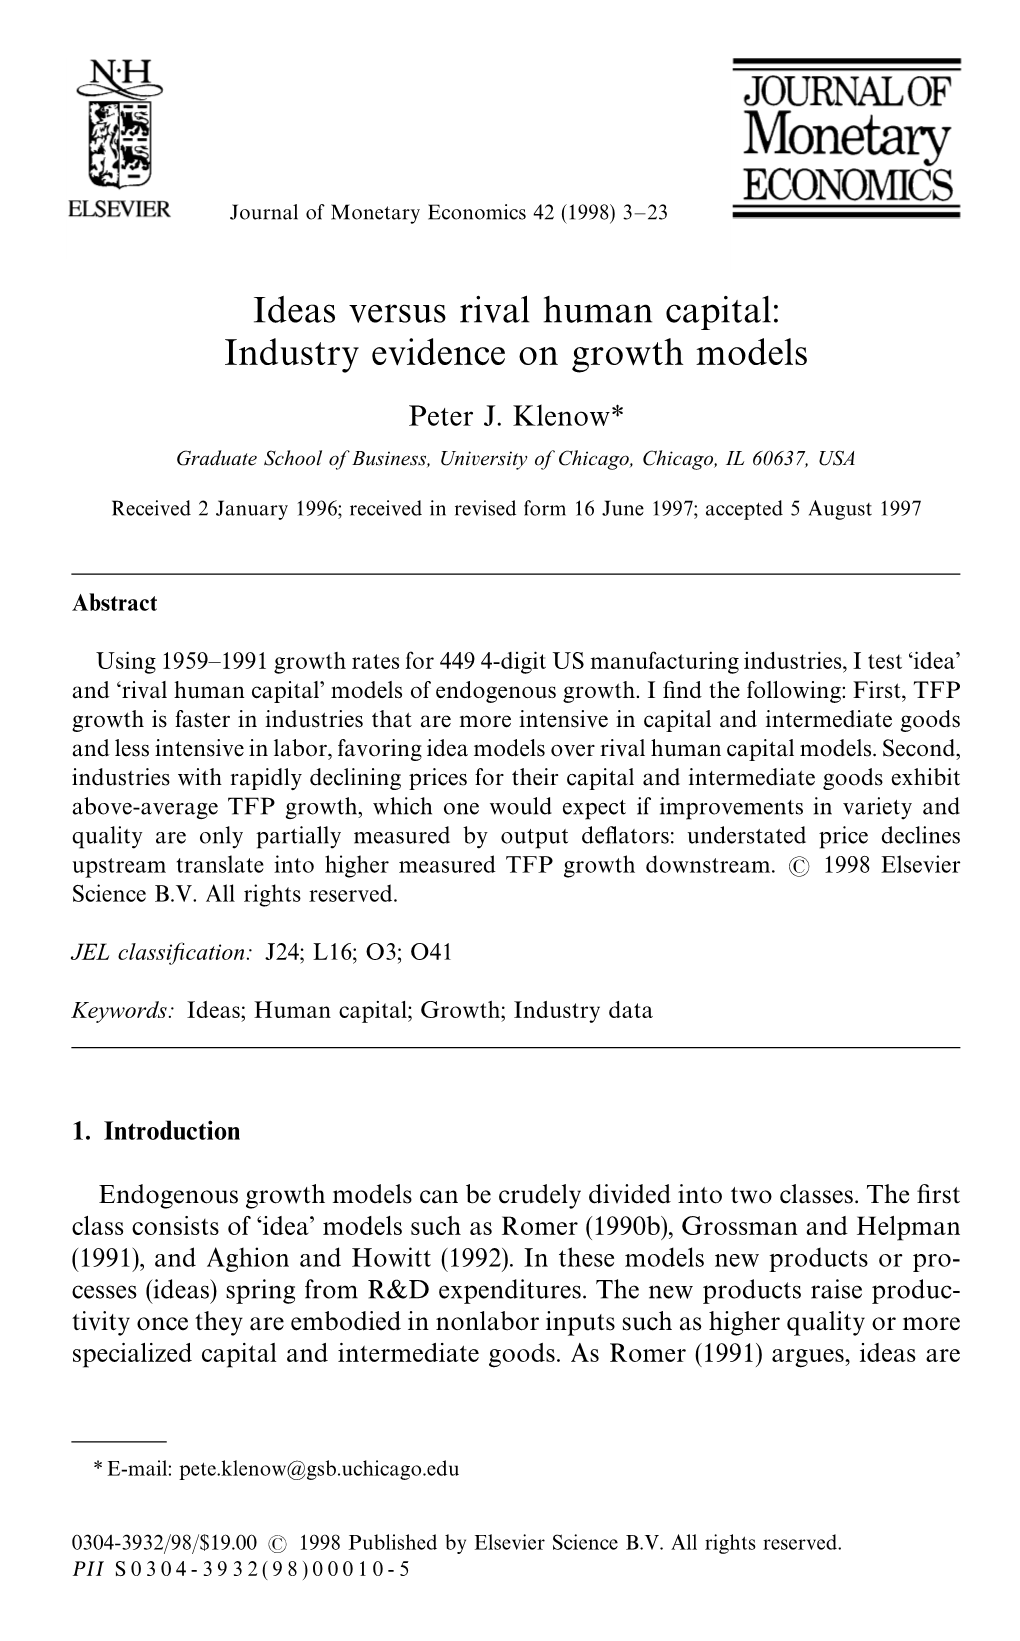 Ideas Vs. Rival Human Capital: Industry Evidence on Growth Models